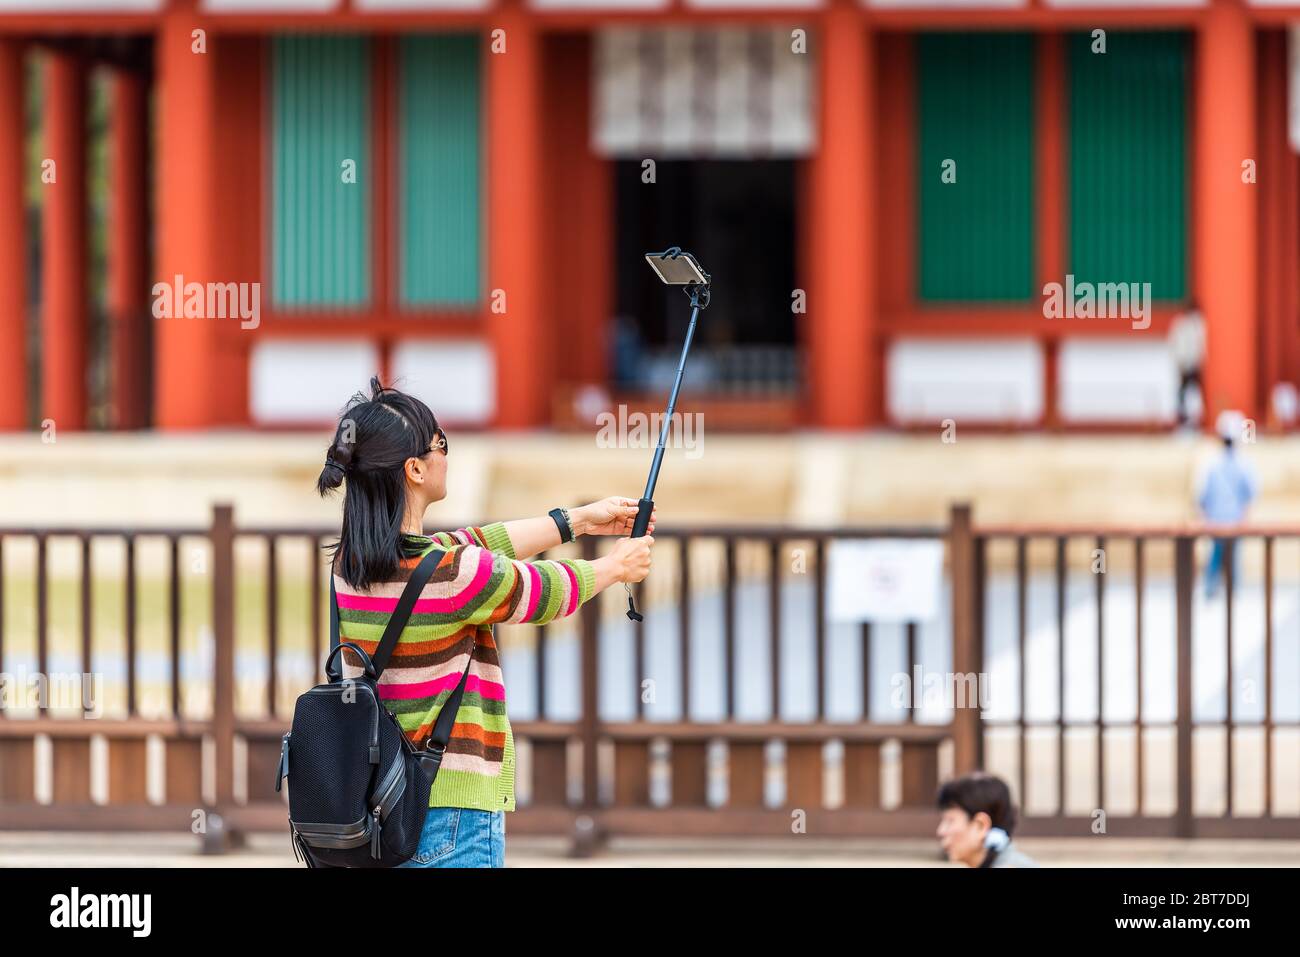 Nara, Japan - April 14, 2019: Back of people woman tourist taking picture with selfie stick of Kofuku-ji temple Chu-Kondo Central Golden Hall in city Stock Photo